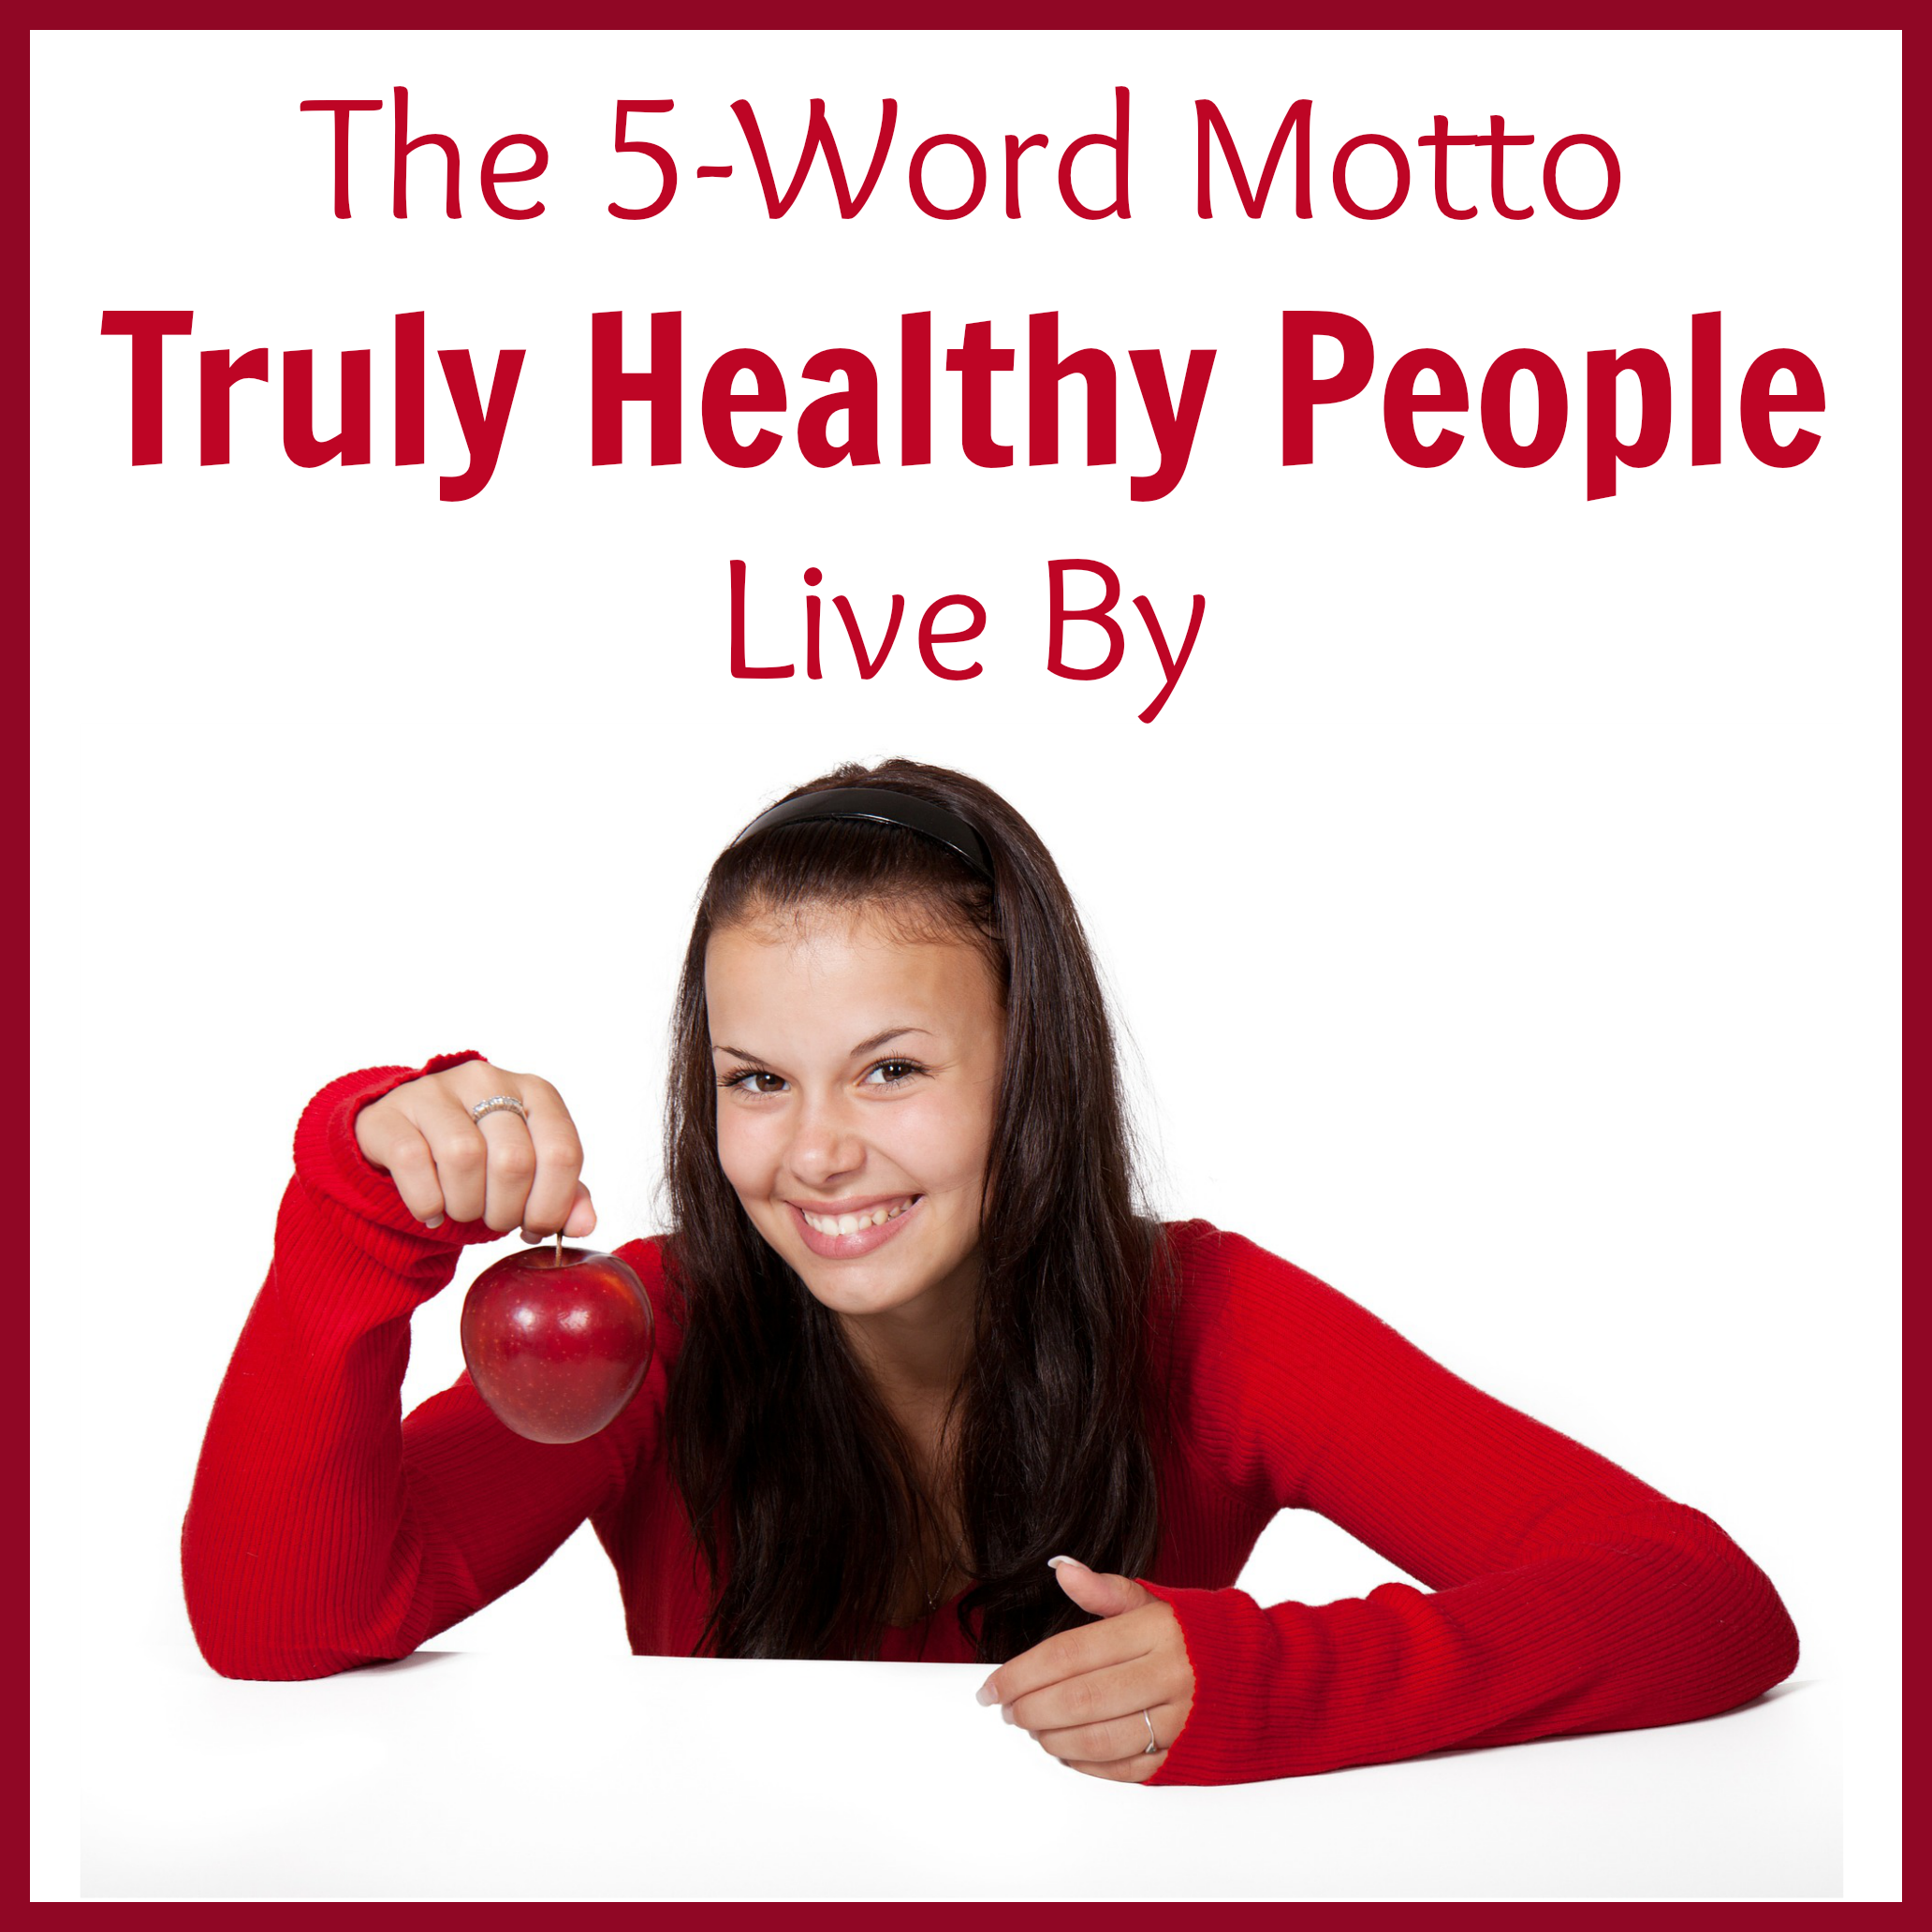 The 5-Word Motto Truly Healthy People Live By